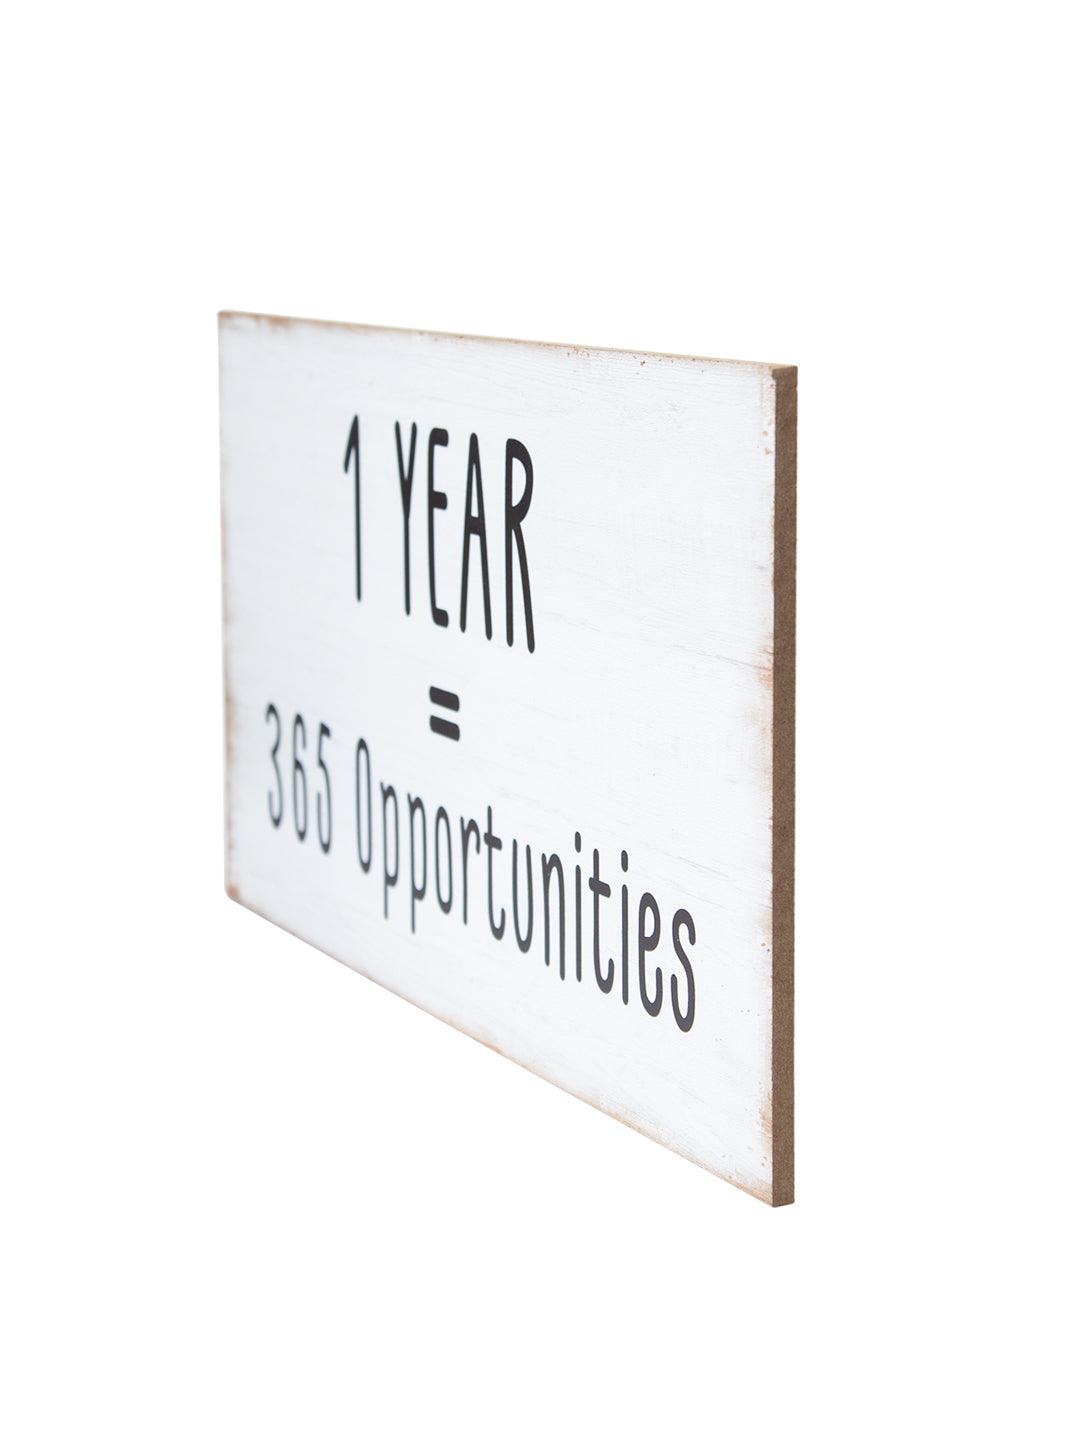 1 YEAR = 365 Opportunities - Wall Hanging Plaque - MARKET 99